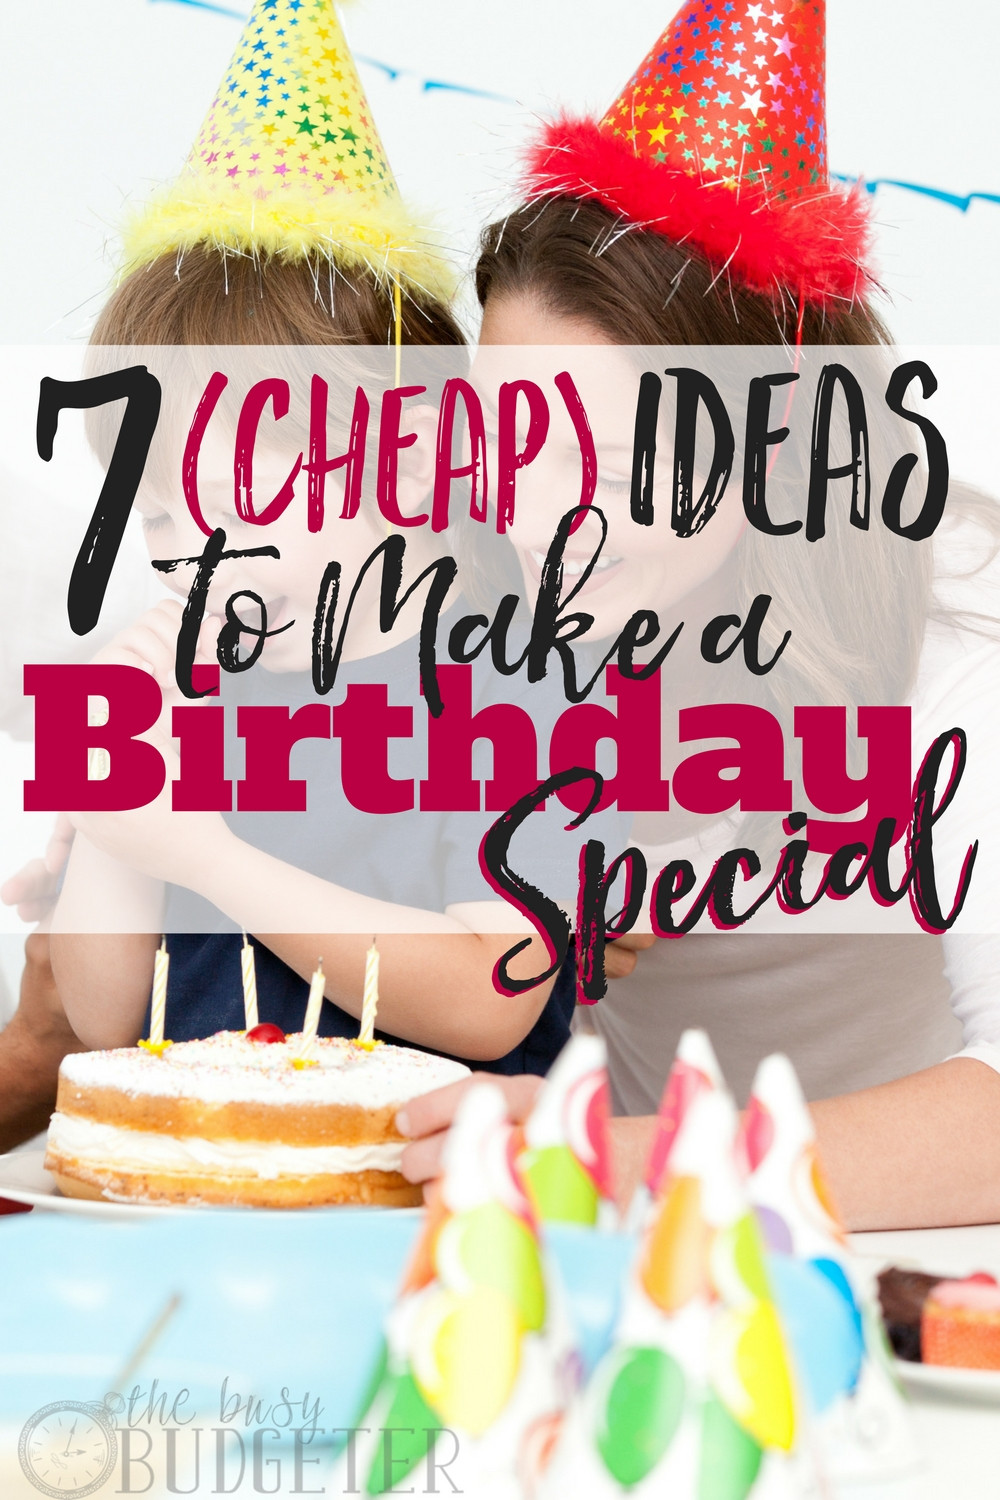 Simple Birthday Party Ideas For Adults
 7 Cheap Ideas to Make a Birthday Special